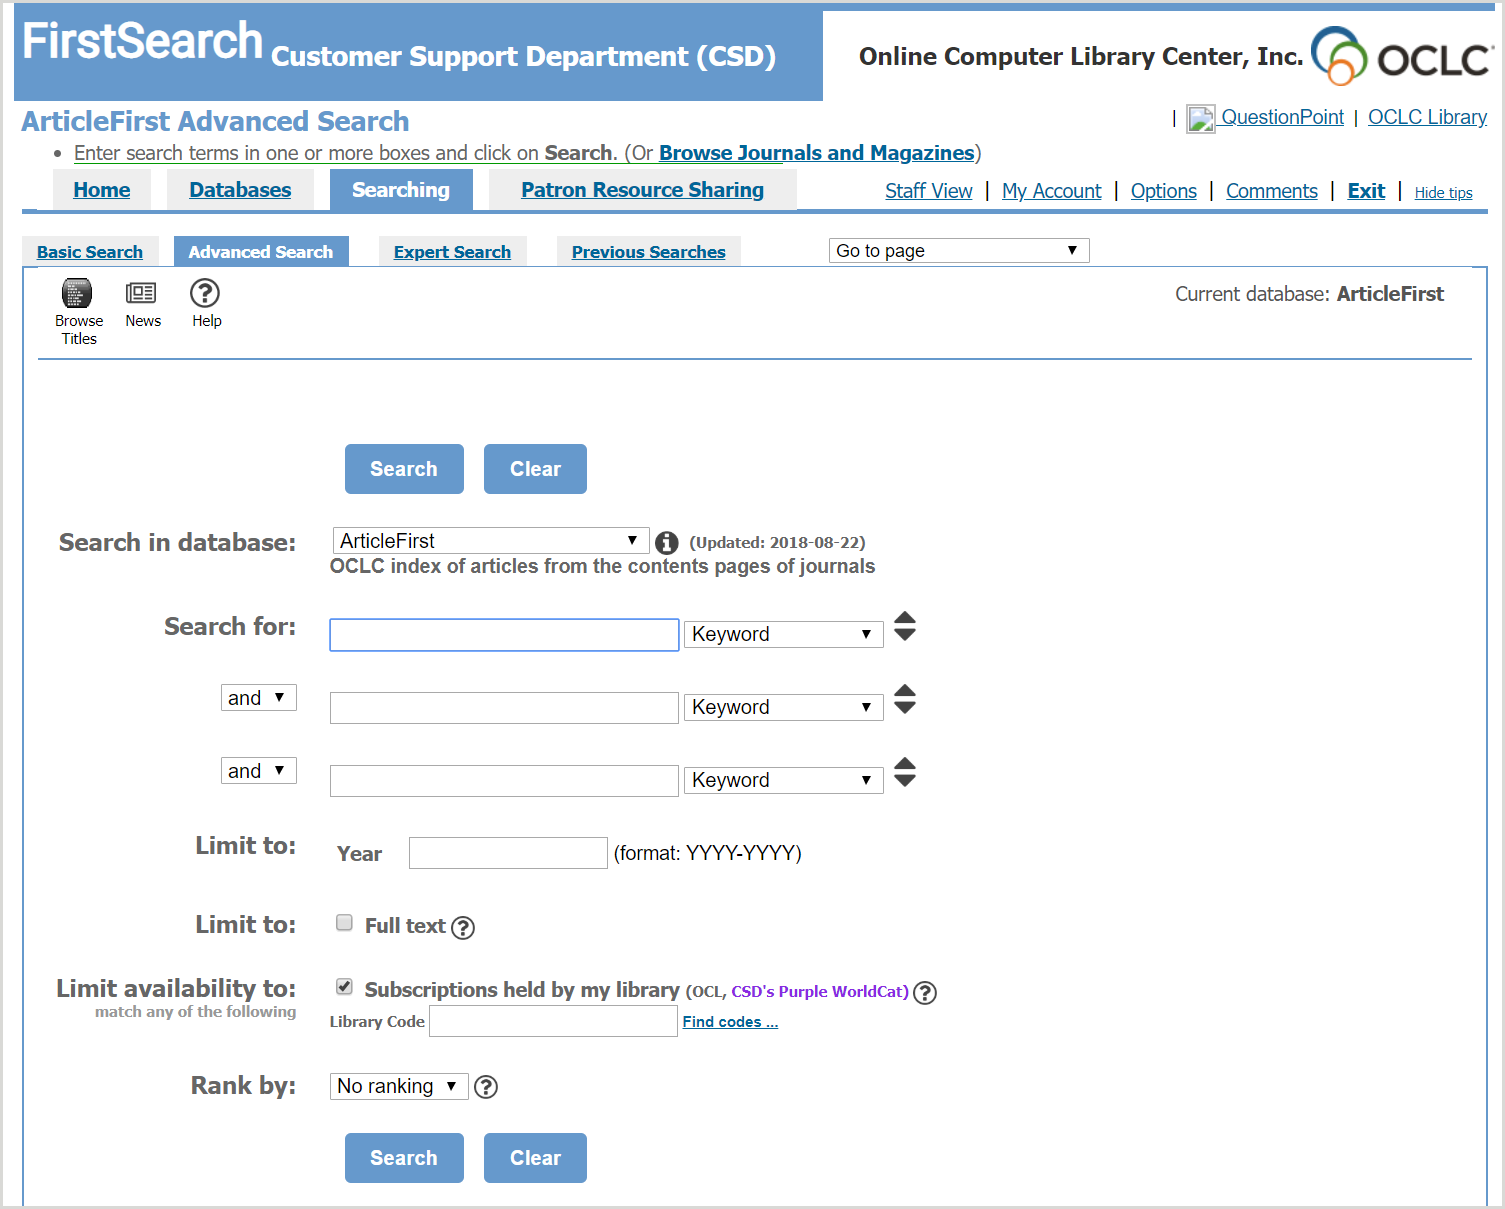 firstsearch-basics-advanced-search.png